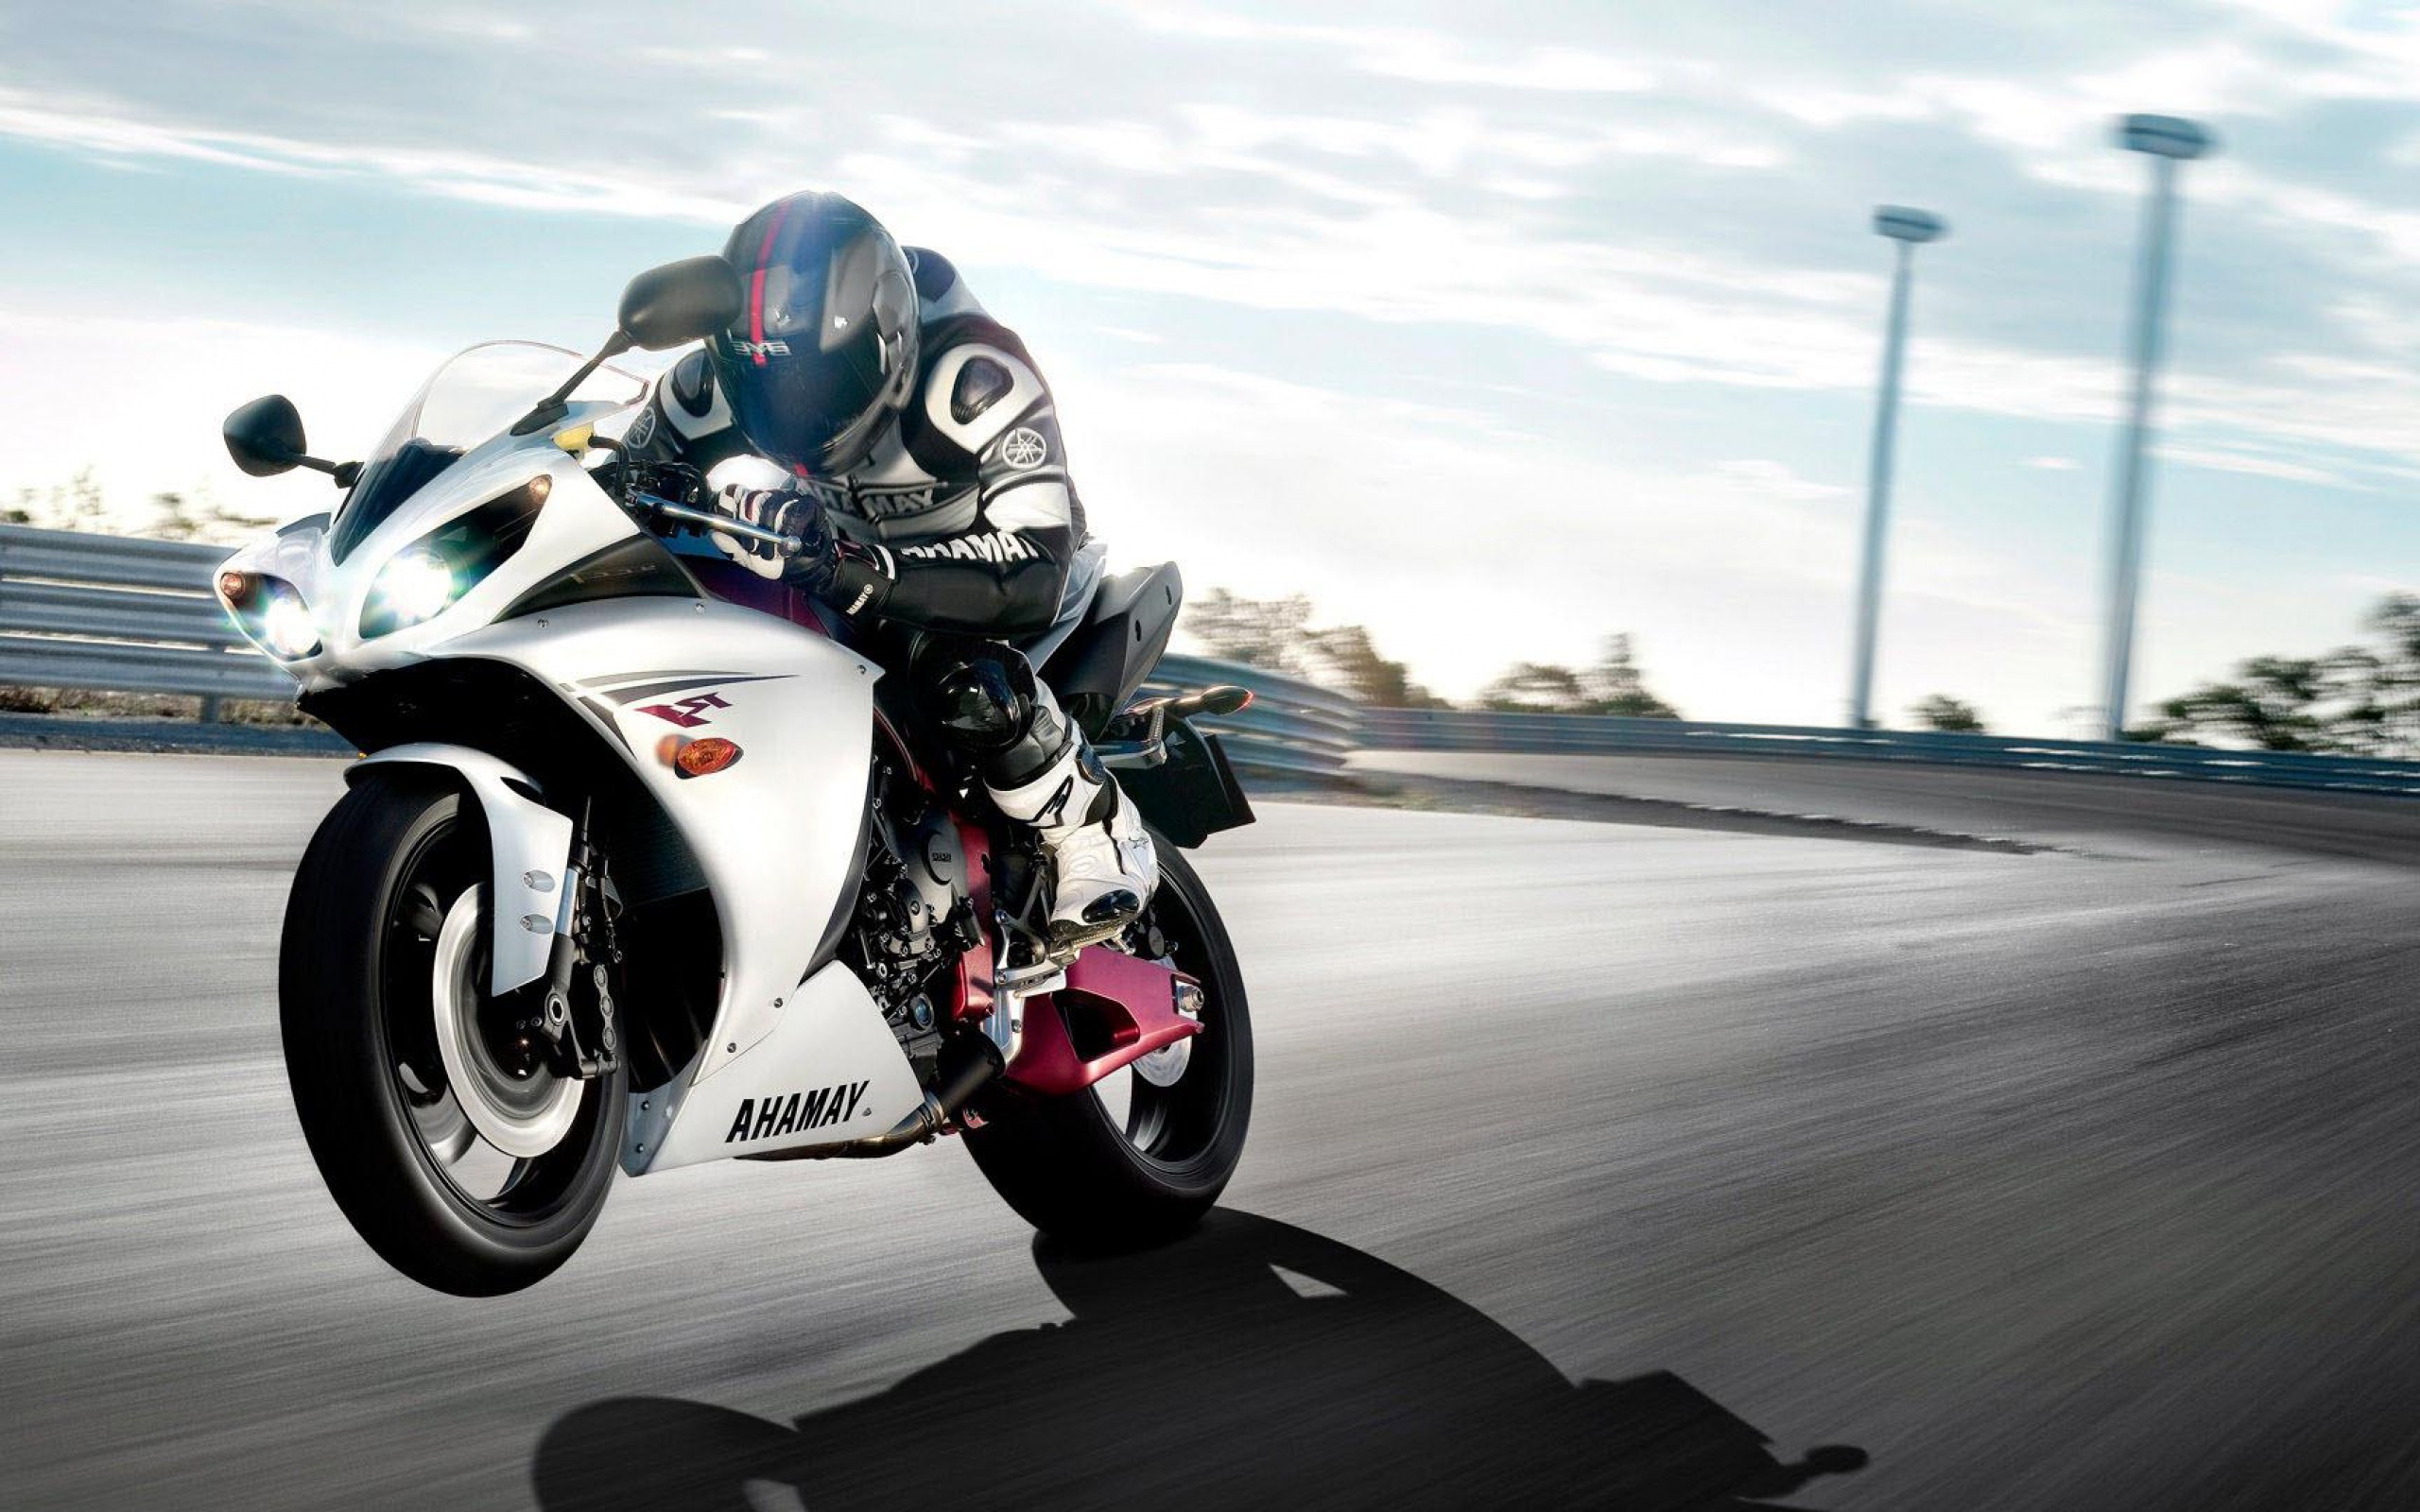 2560x1600 ... Motorcycle HD Wallpapers - Wallpaper Cave ...